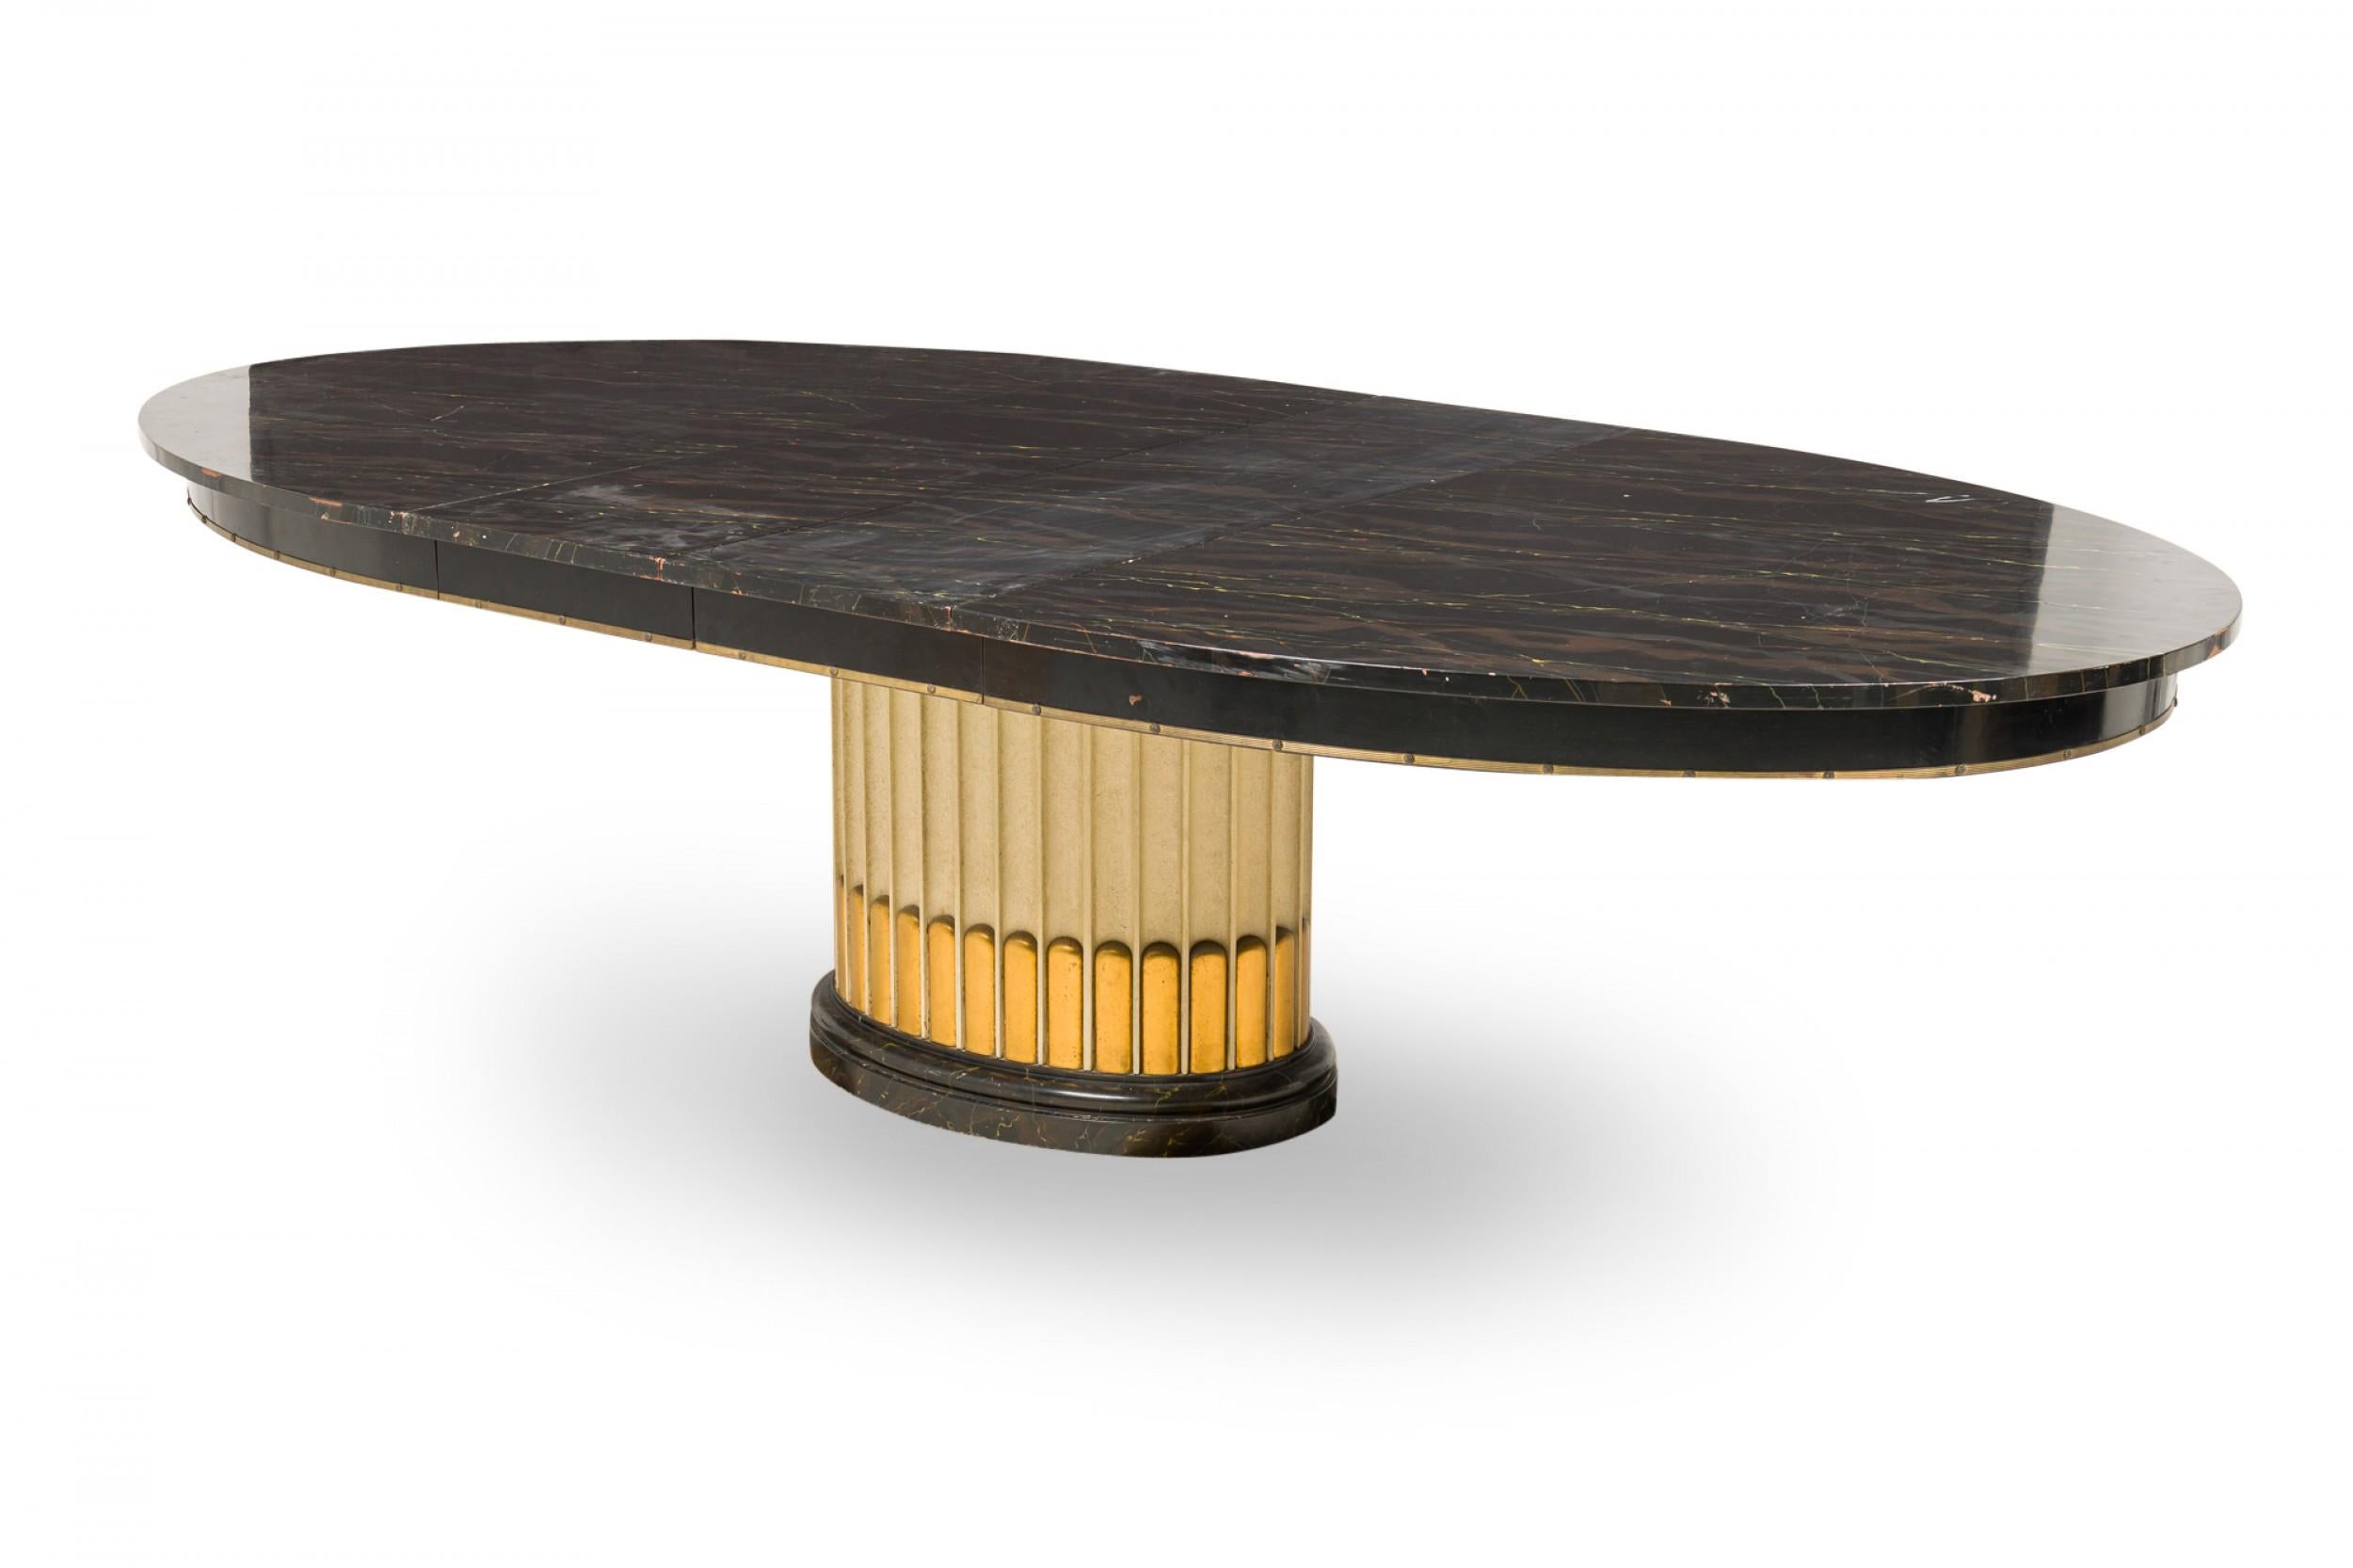 20th Century Paul Frankl American Art Deco Oval Black Lacquer & Brass Extension Dining Table For Sale